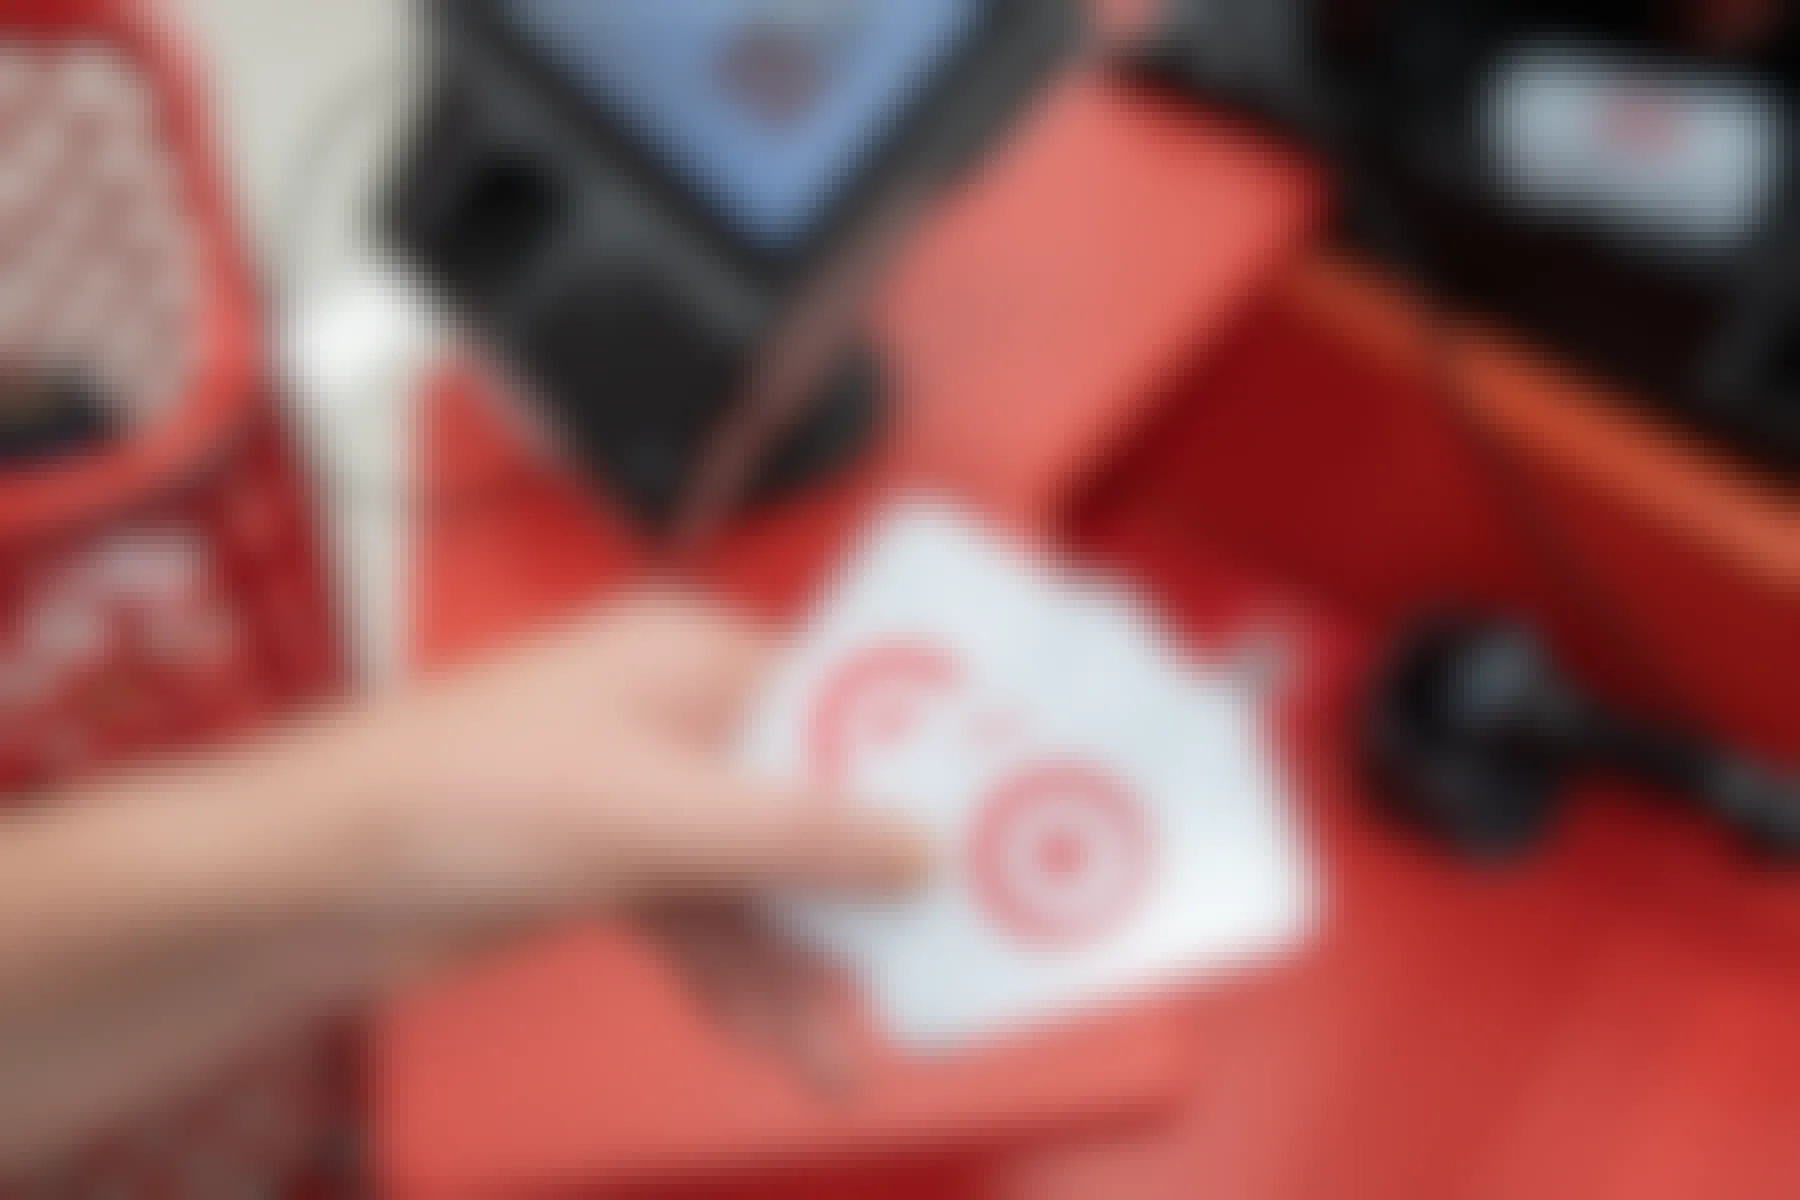 A person's hand holding three Target gift cards in front of the checkout counter at Target.